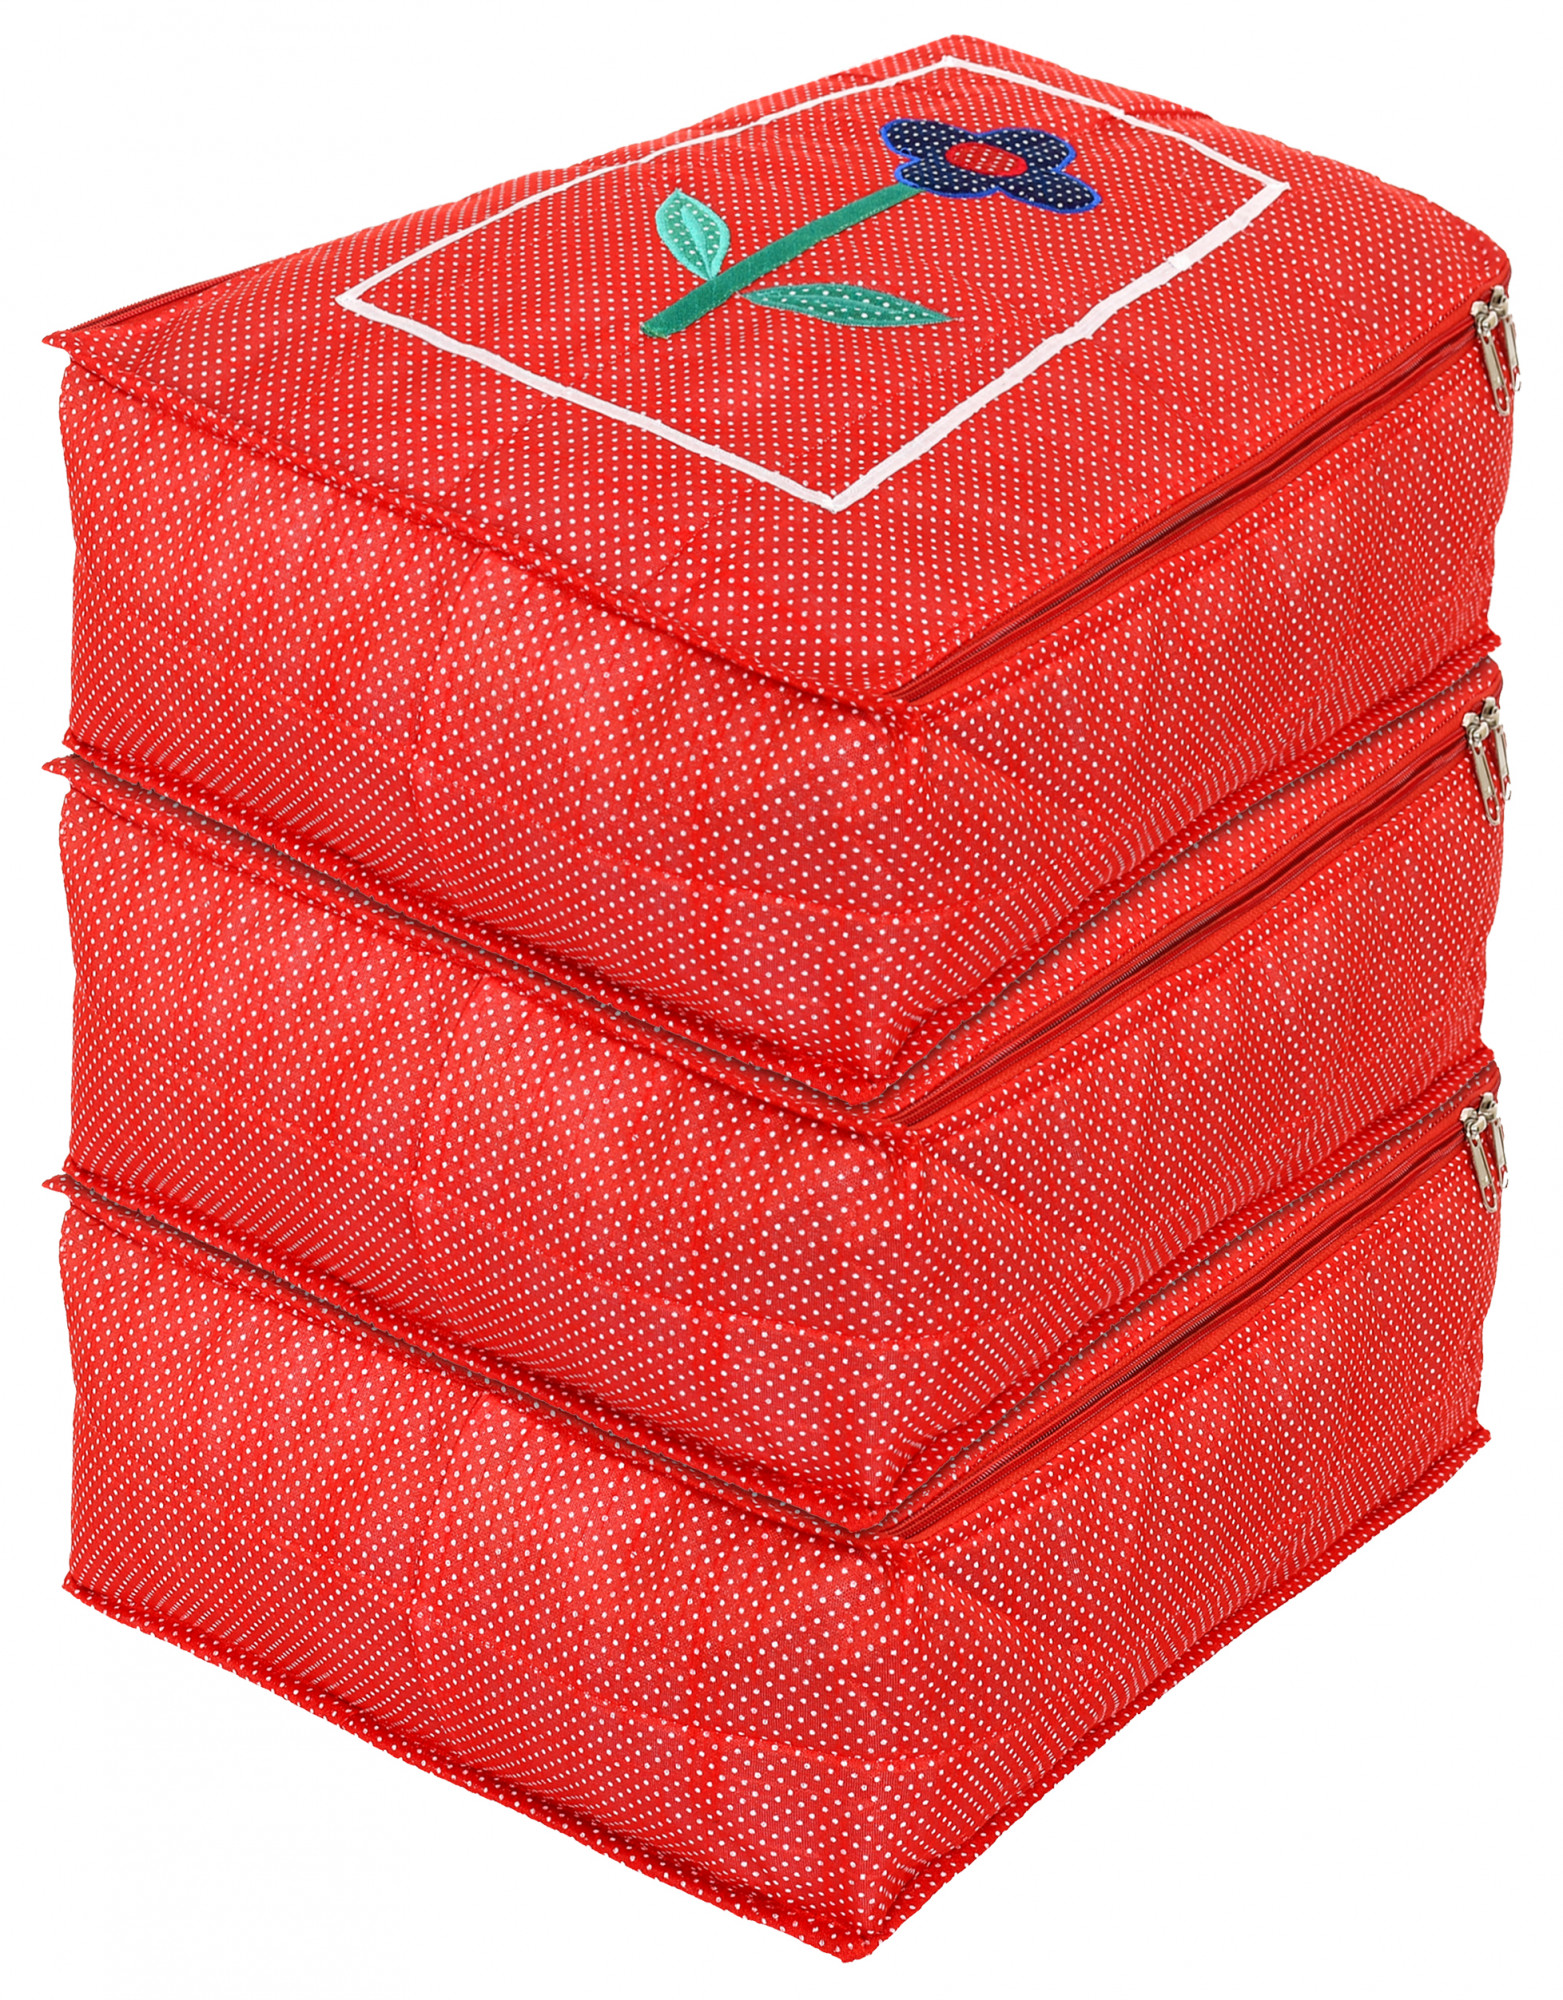 Kuber Industries Dot Printed Petticoat Cover Bag/Garment cover/Wardrobe Clothes Organizer (Red)